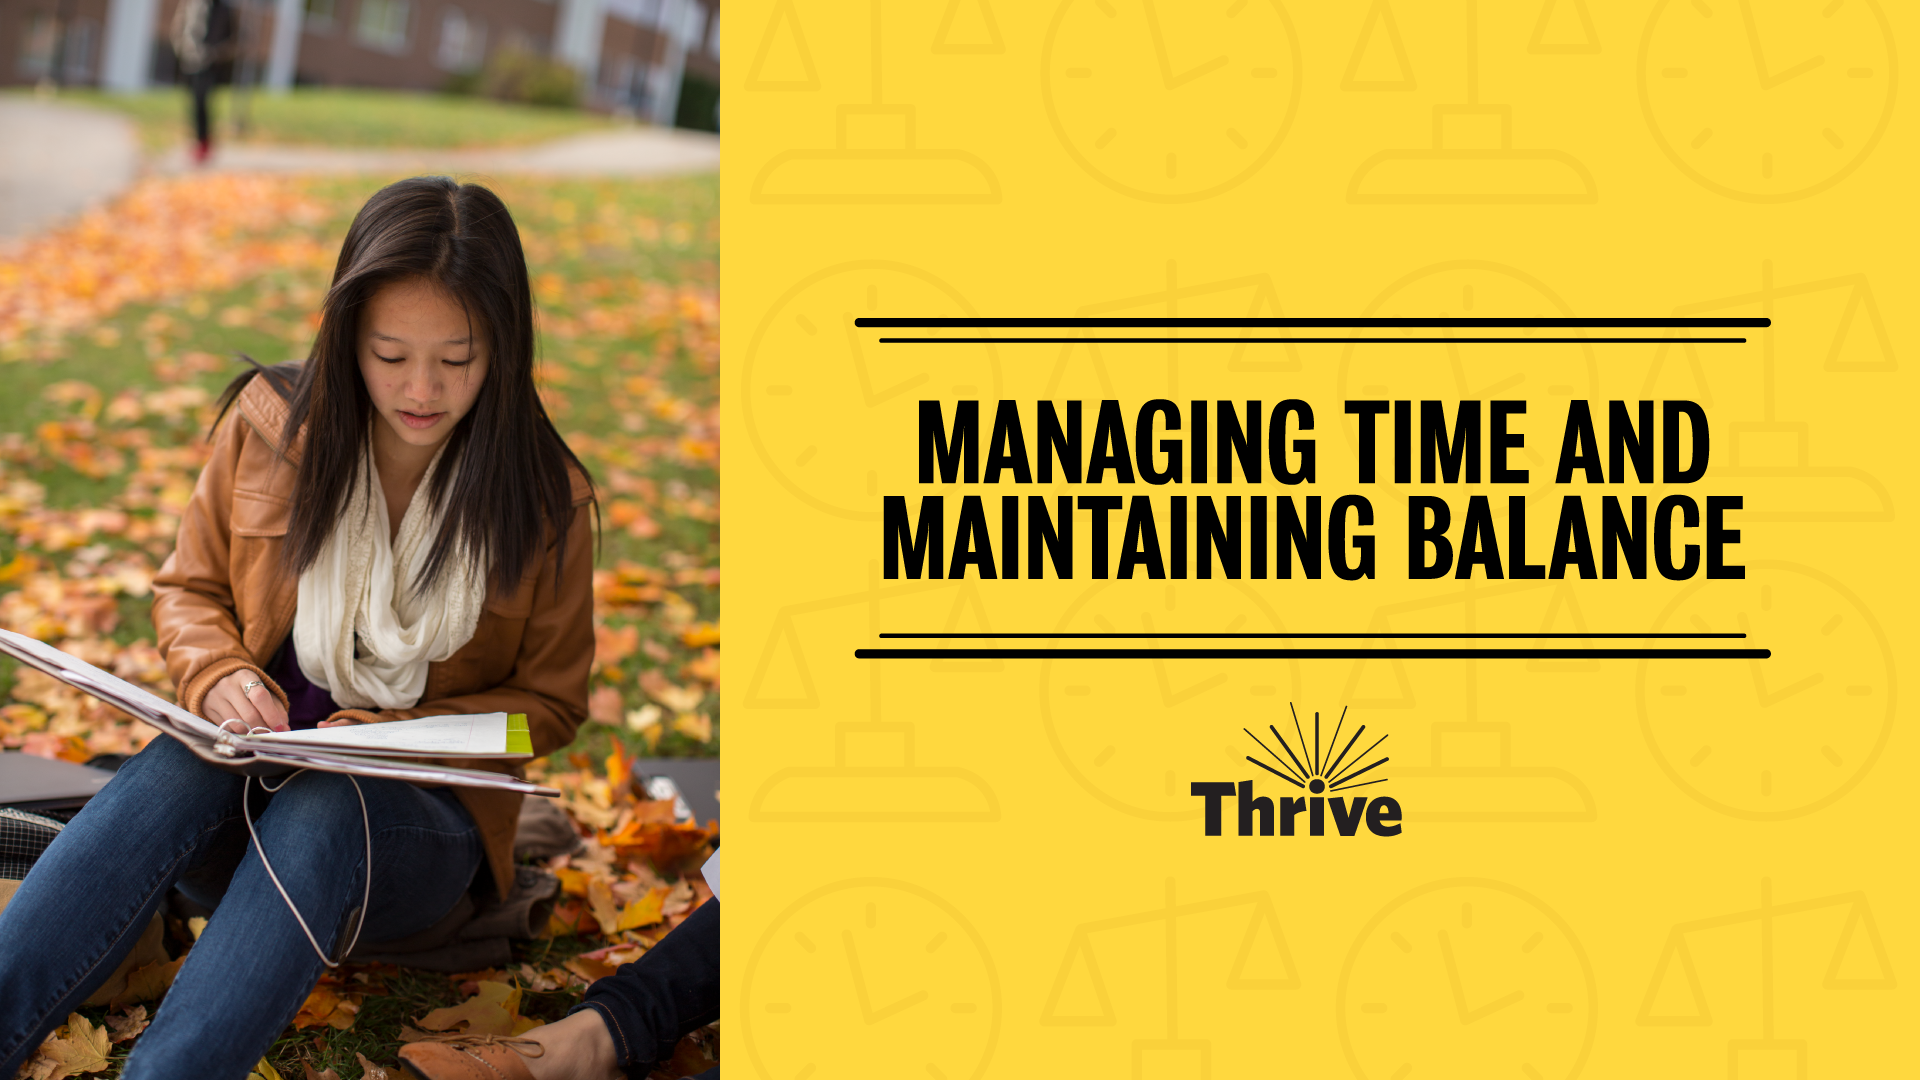 "Managing Time and Maintaining Balance"